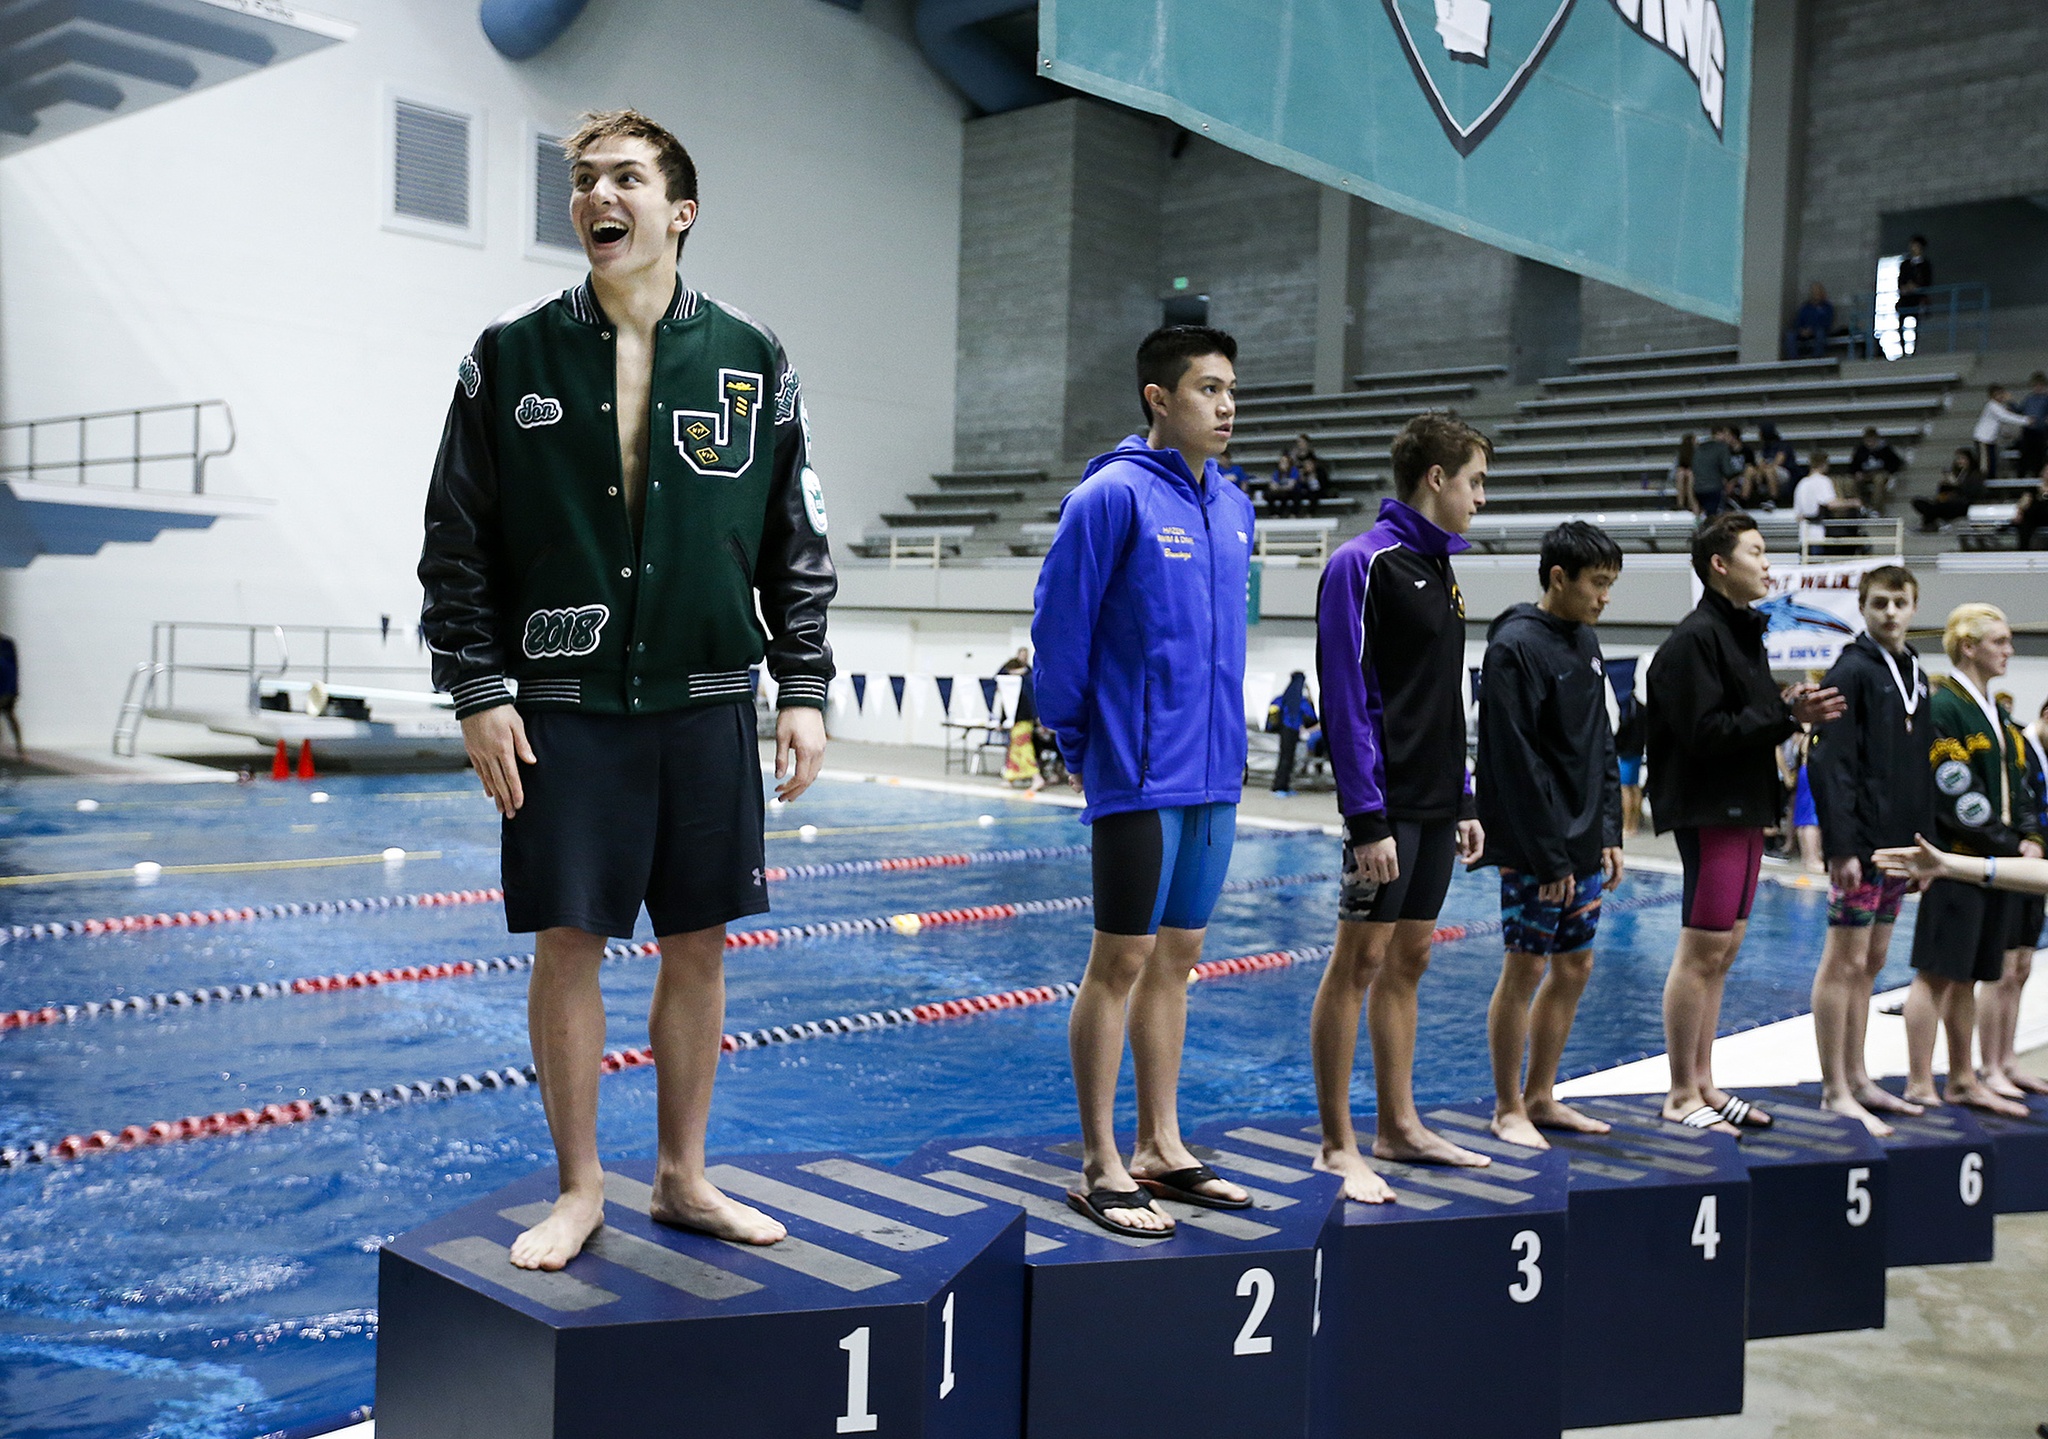 Jackson’s Jonathan Cook (left) smiles from the podium after winning the 100-yard breaststroke race at the 4A State Boys Swimming and Diving Championship at the King County Aquatic Center in Federal Way on Feb. 18, 2017. Cook’s time of 53.91 set a meet record. (Ian Terry / The Herald)